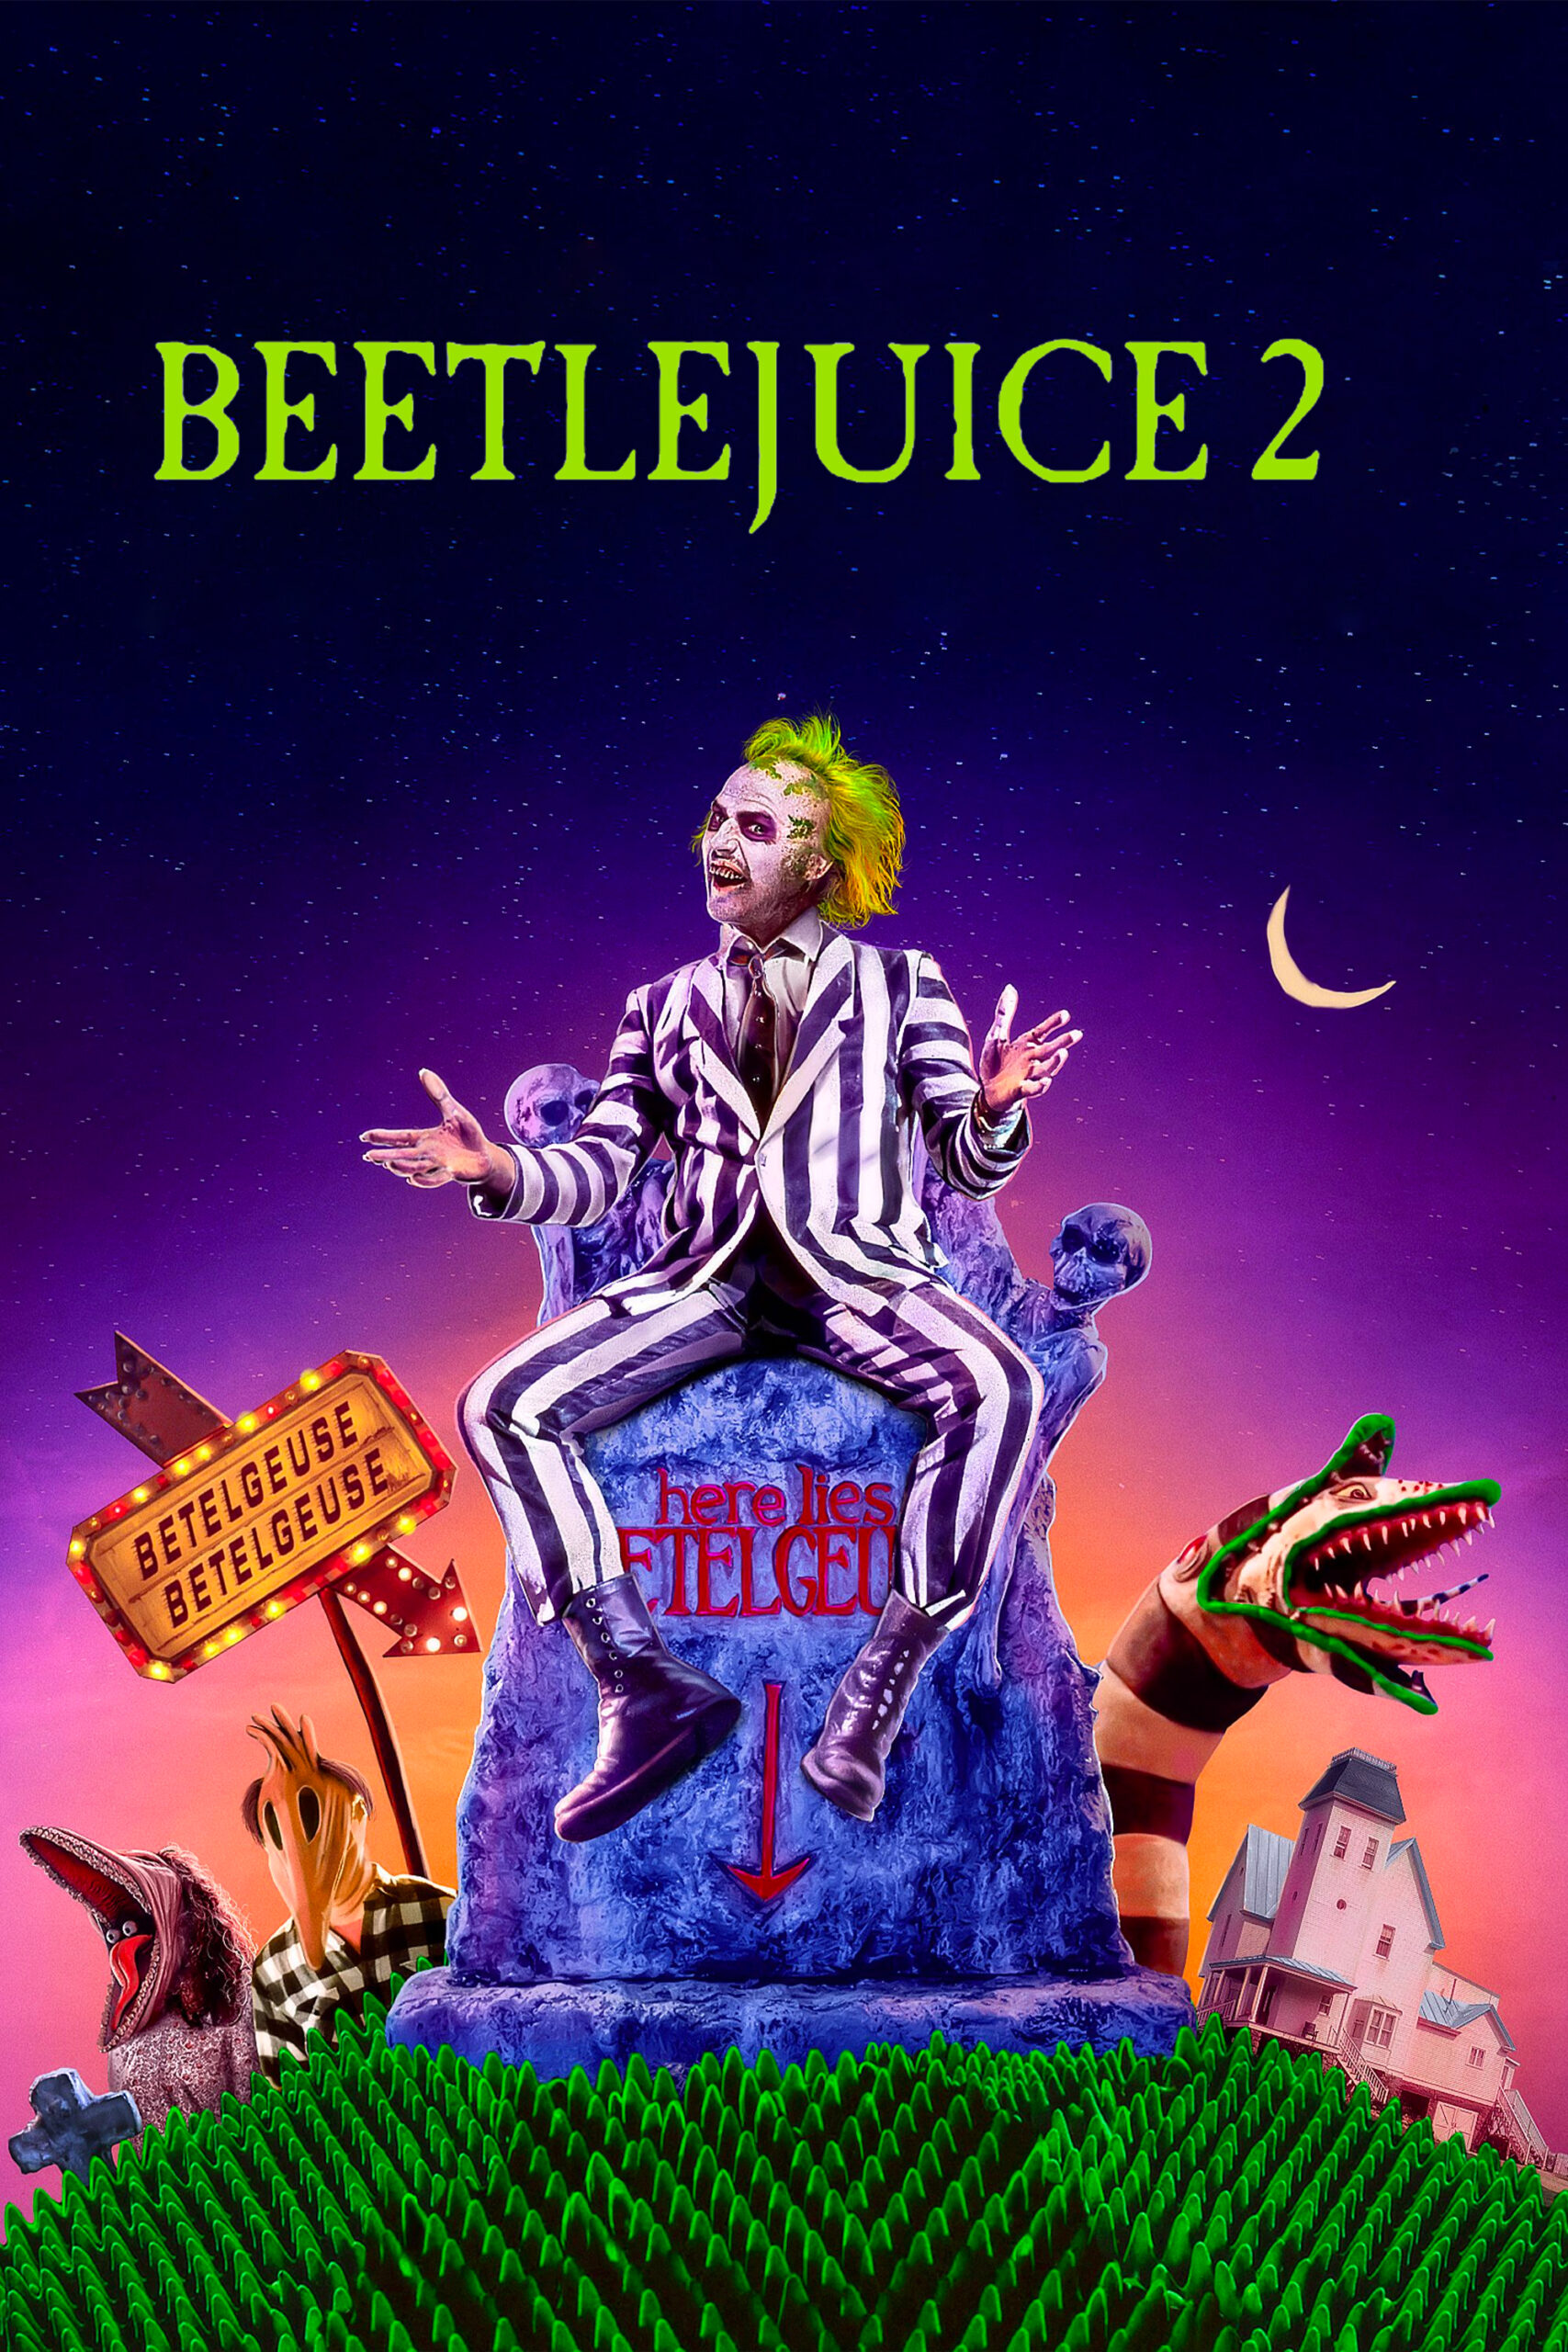 Beetlejuice 2 Trailer, Cast, Release Date And Everything We Know So Far